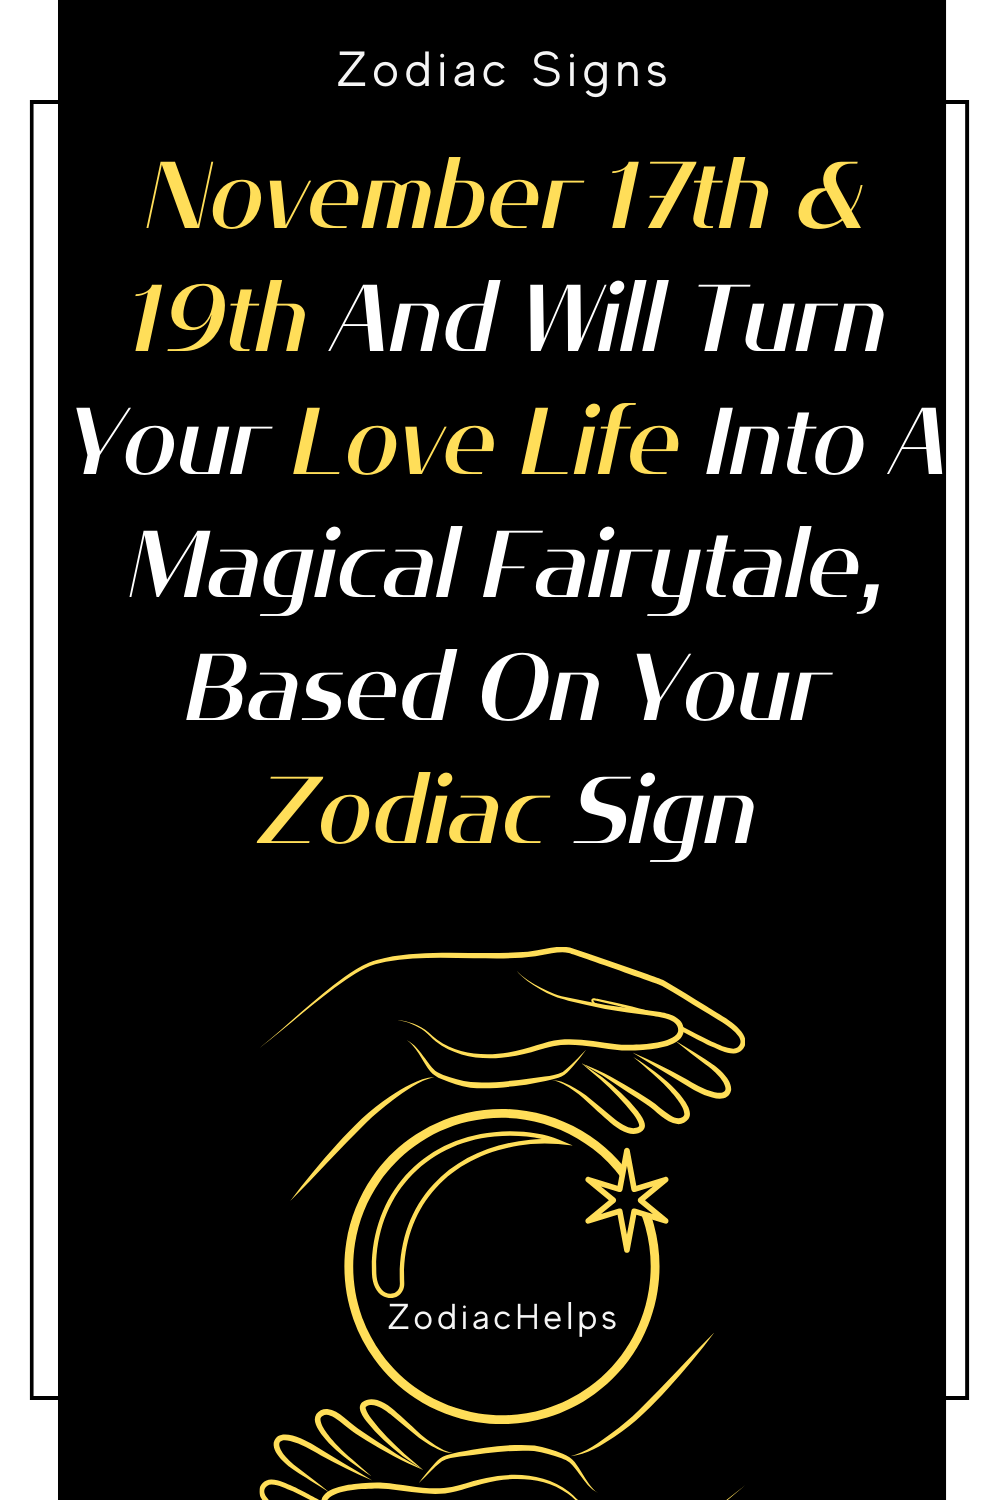 November 17th & 19th And Will Turn Your Love Life Into A Magical Fairytale, Based On Your Zodiac Sign